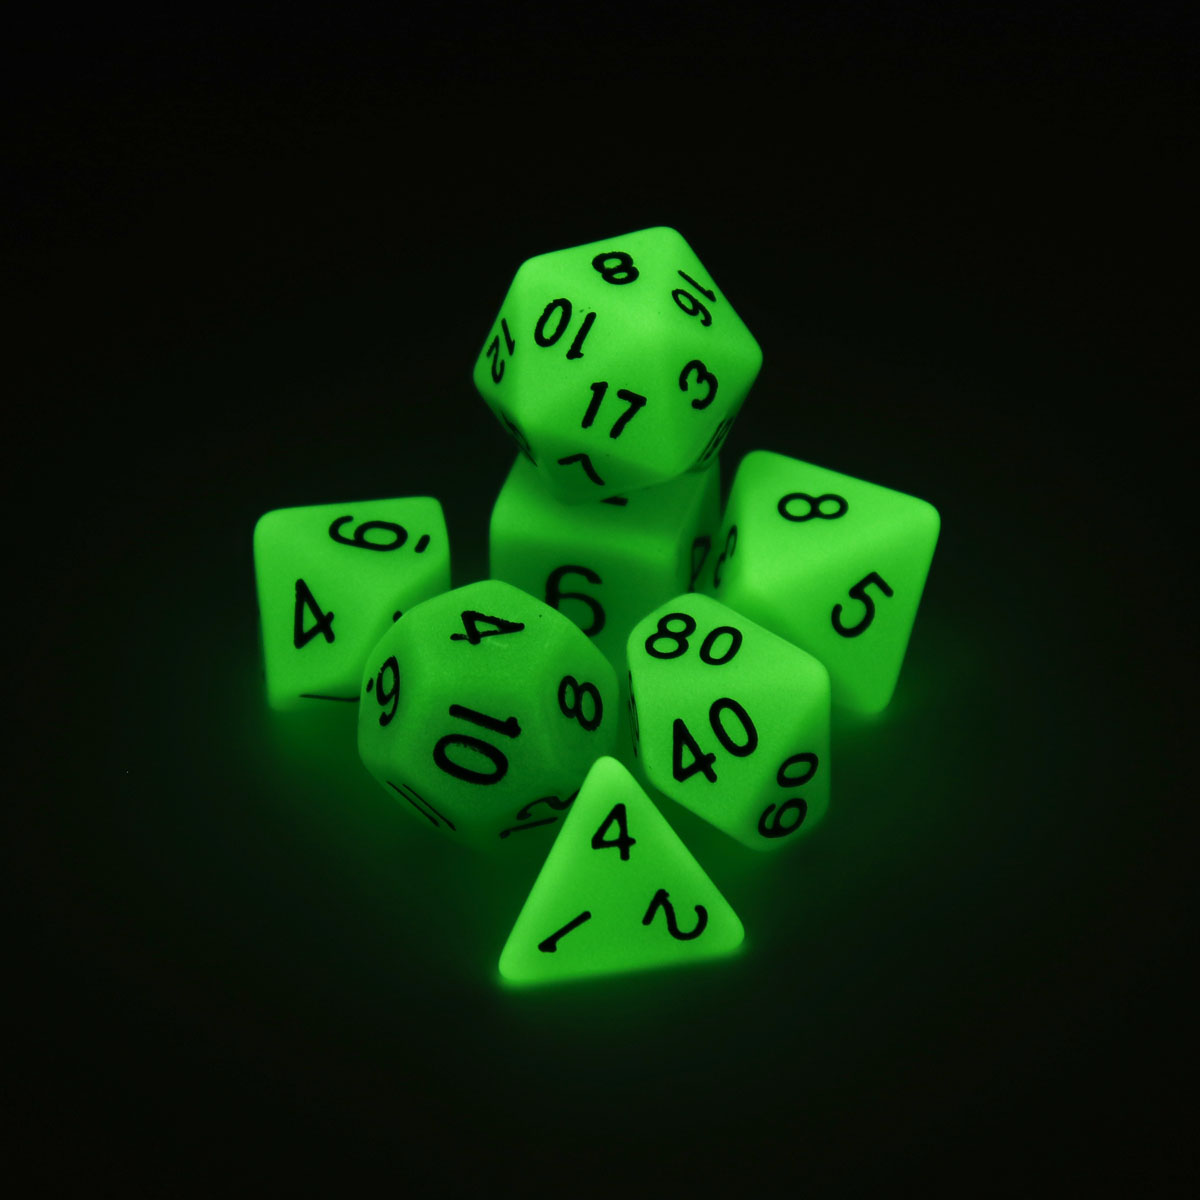 7-Pcs-Luminous-Polyhedral-Dices-Multi-sided-Dice-Set-Polyhedral-Dices-With-Dice-Cup-RPG-Gadget-1422236